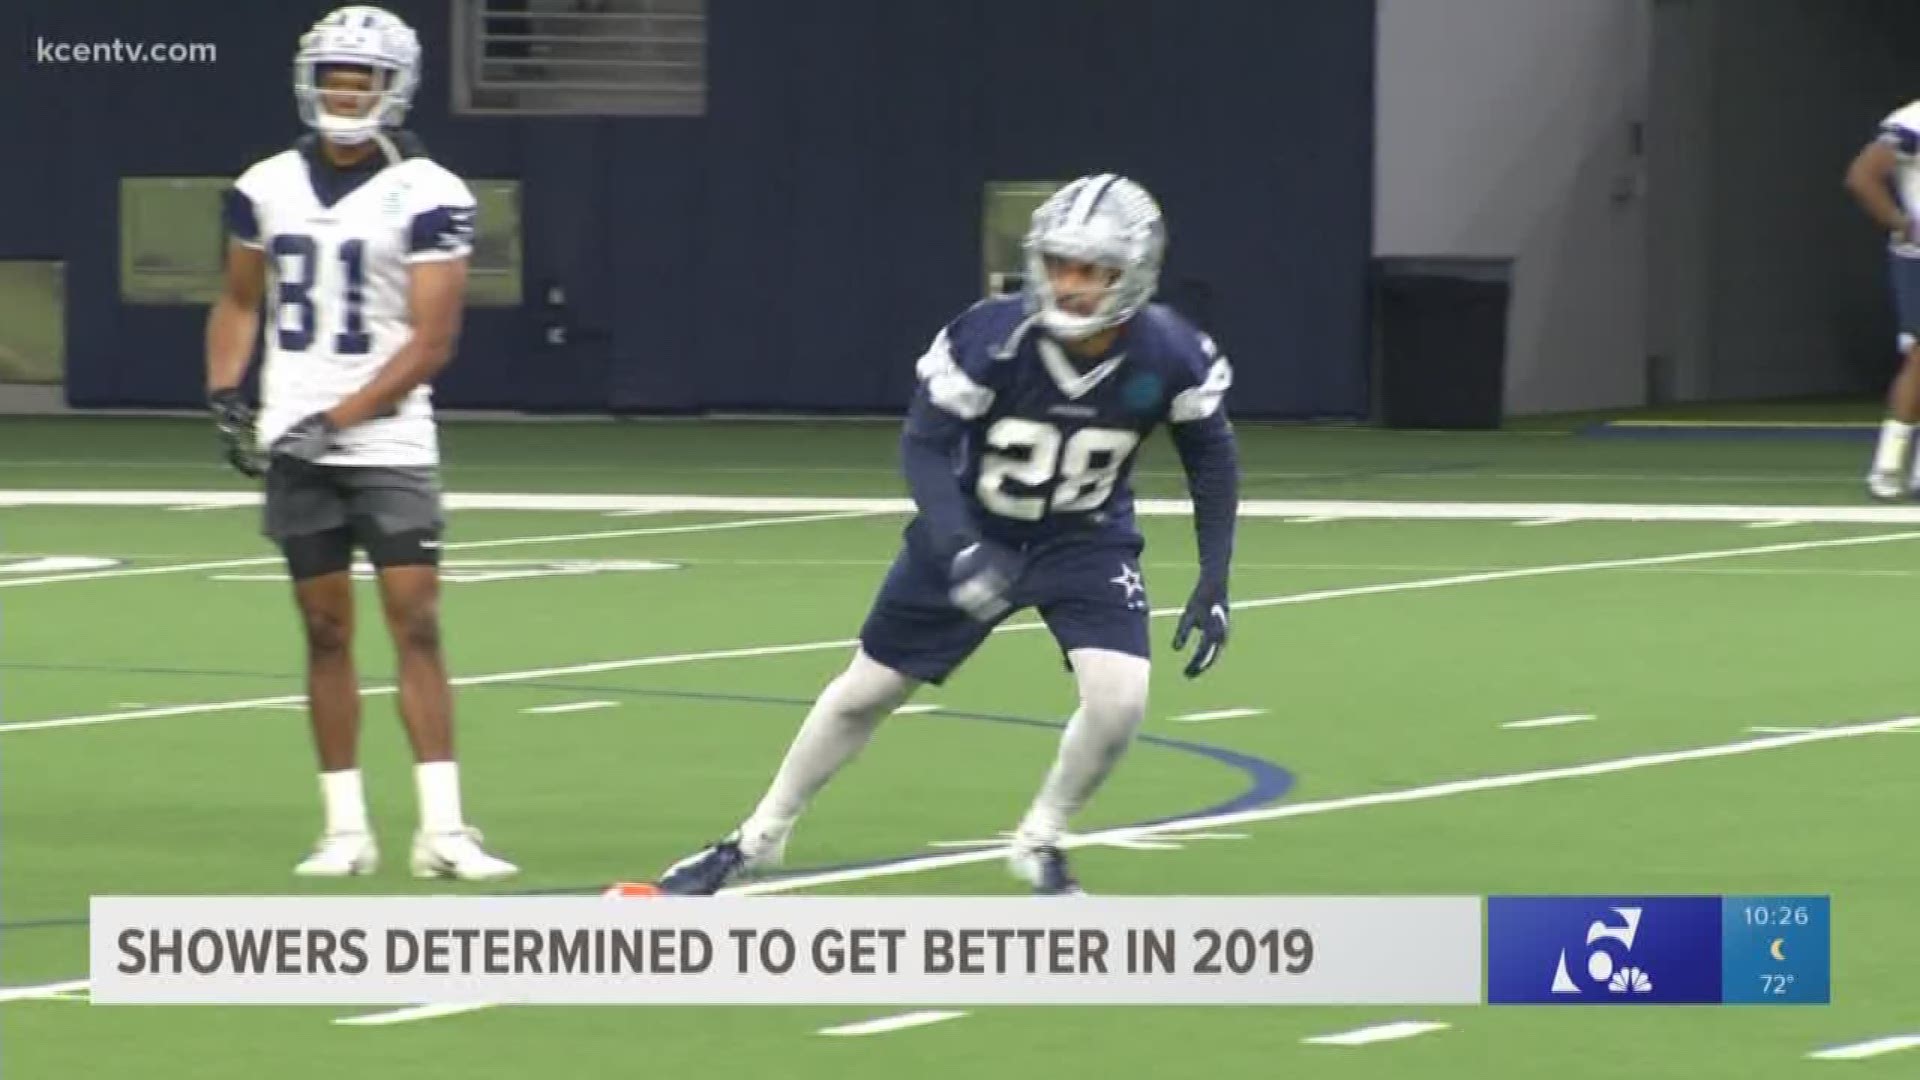 Showers went from being an undrafted quarterback for the Dallas Cowboys, to entering his second full season as a safety. He's out of practice squad eligibility, so it's make or break time now.